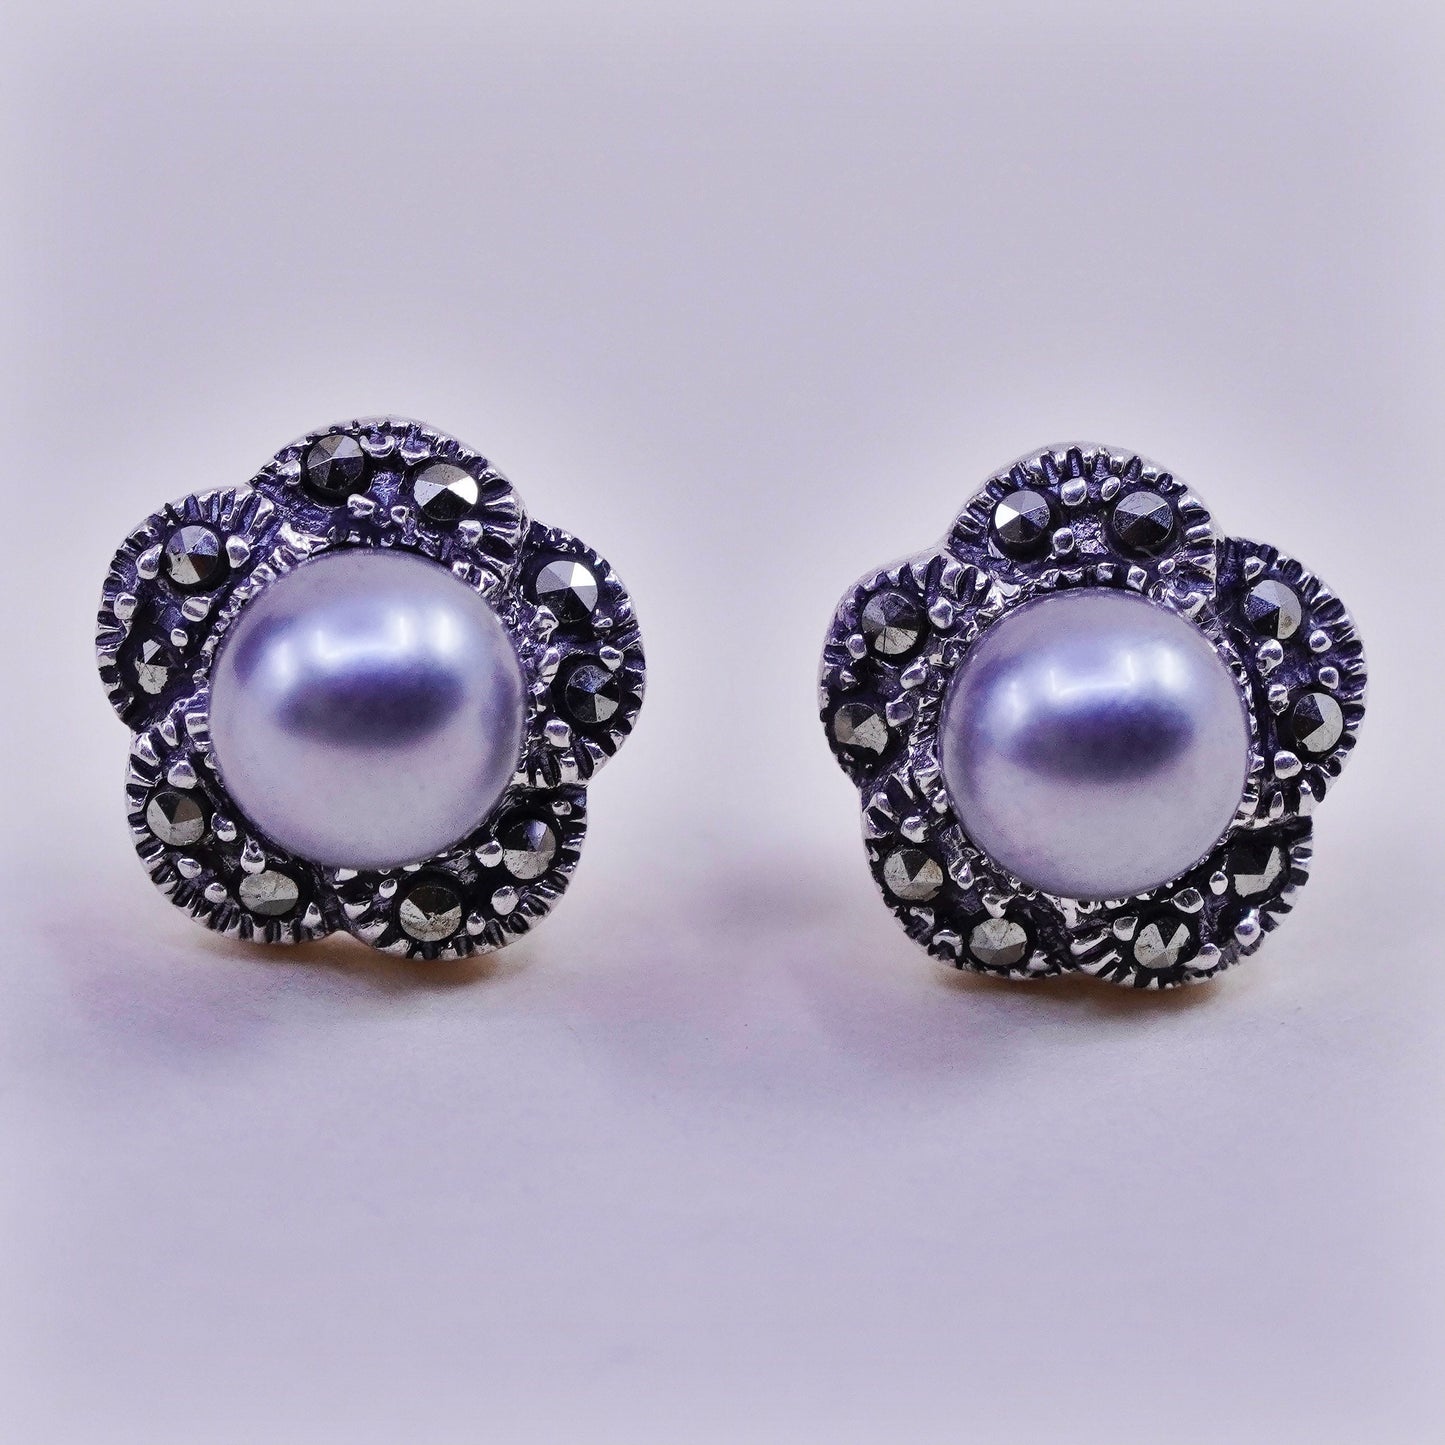 Vintage sterling silver earrings, 925 flower studs with gray pearl marcasite